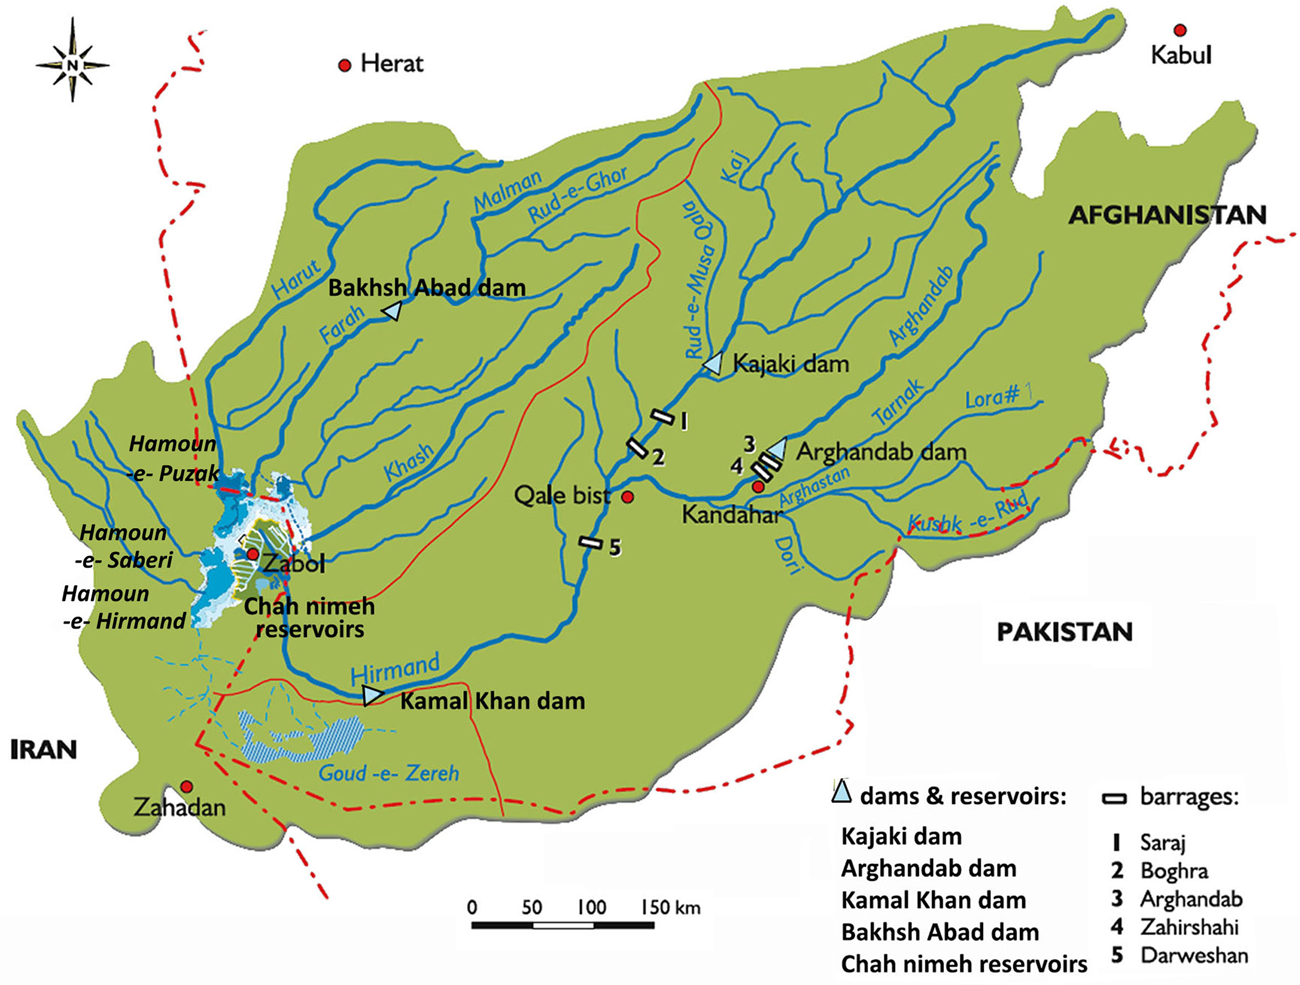 helmand river map